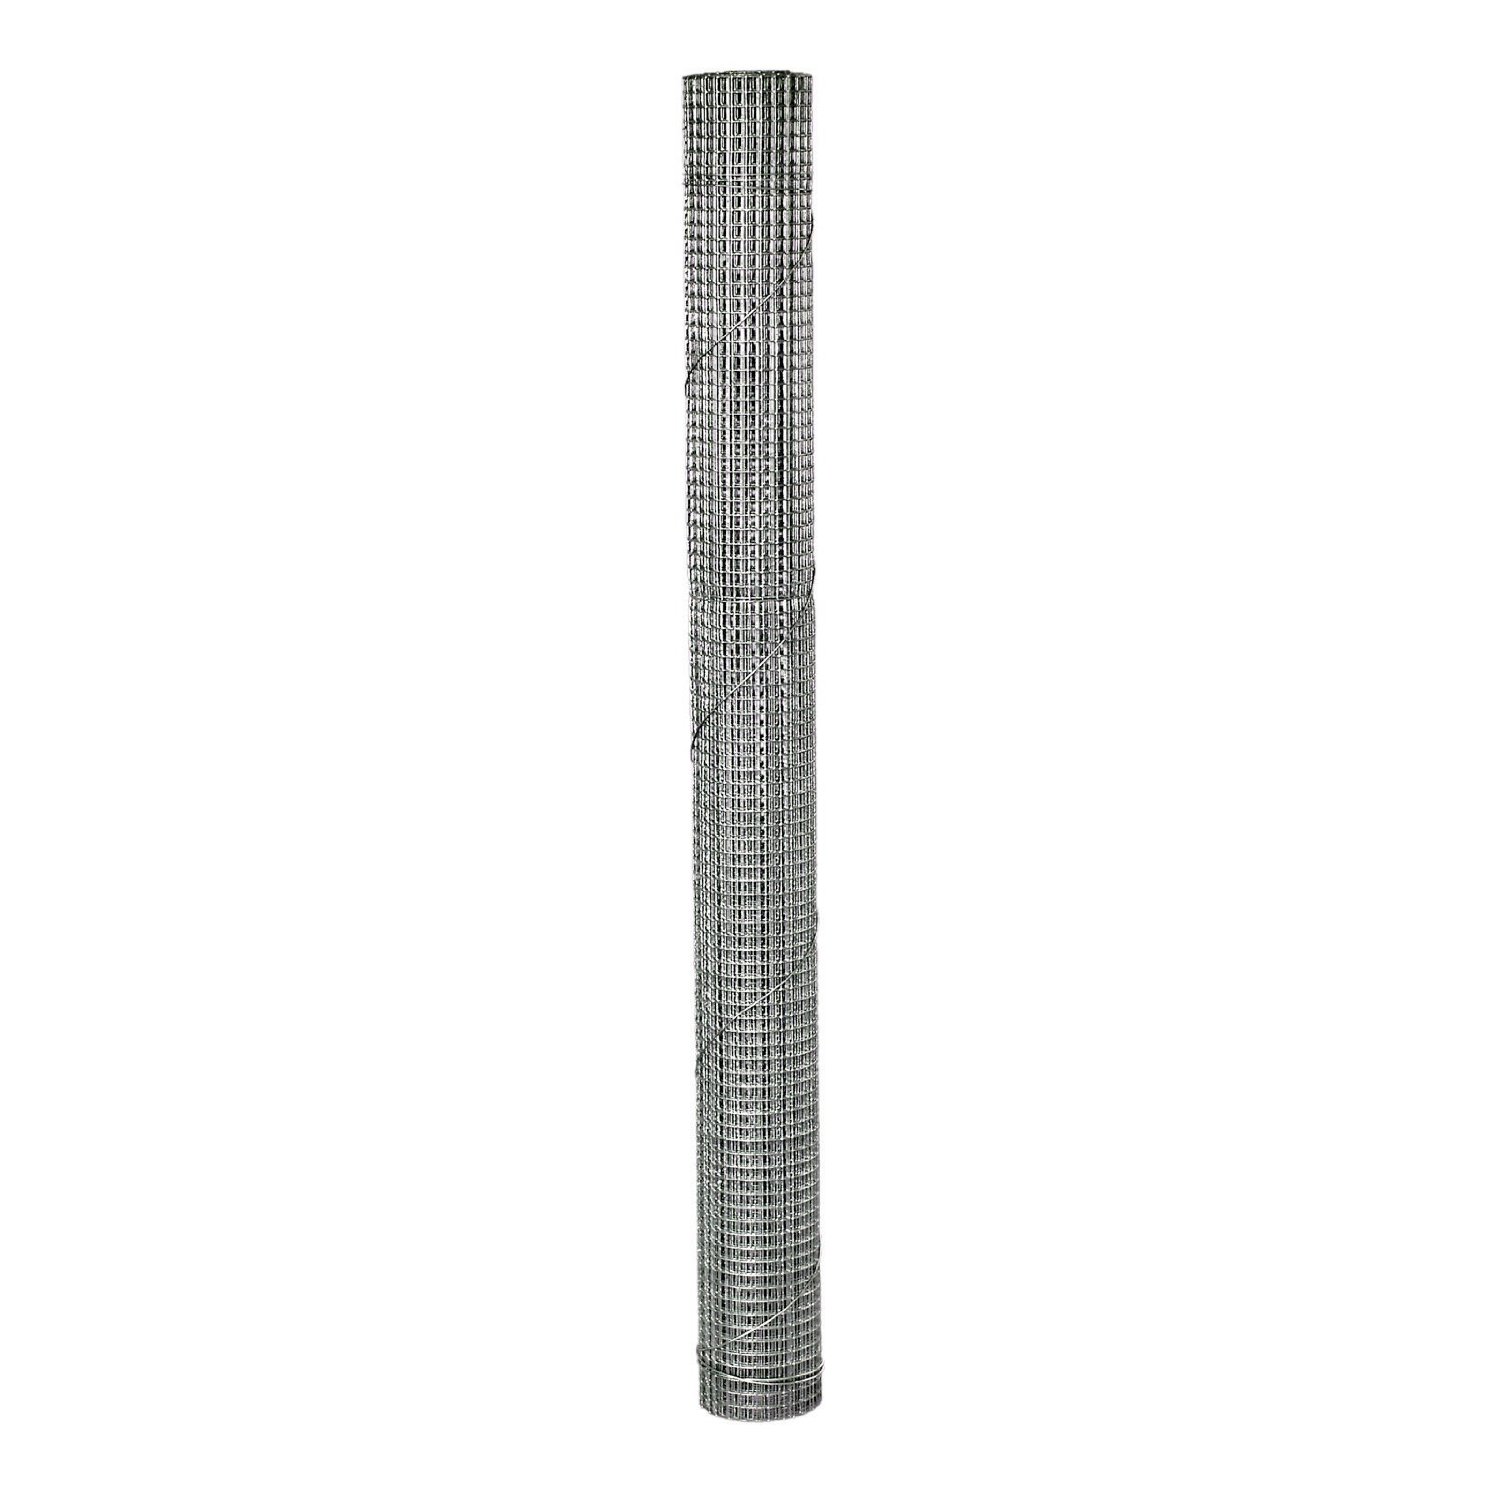 Origin Point 23-Gauge Galvanized Hardware Cloth Fence With 1/4 in. Openings,